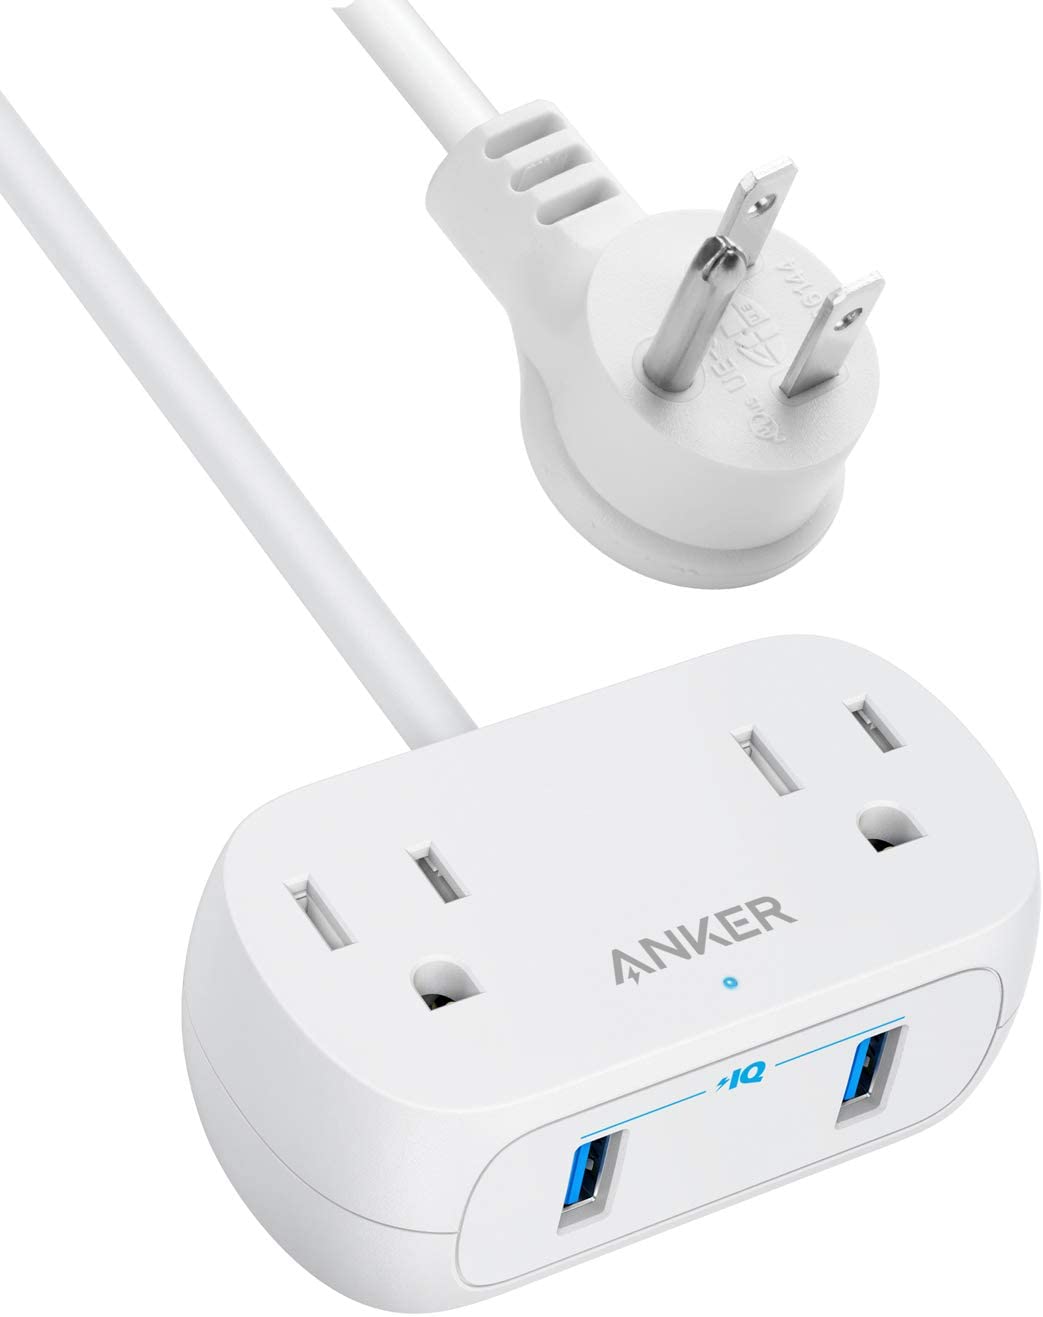 5' Anker Power Strip w/ 2 Outlets & 2 USB Ports $9.99